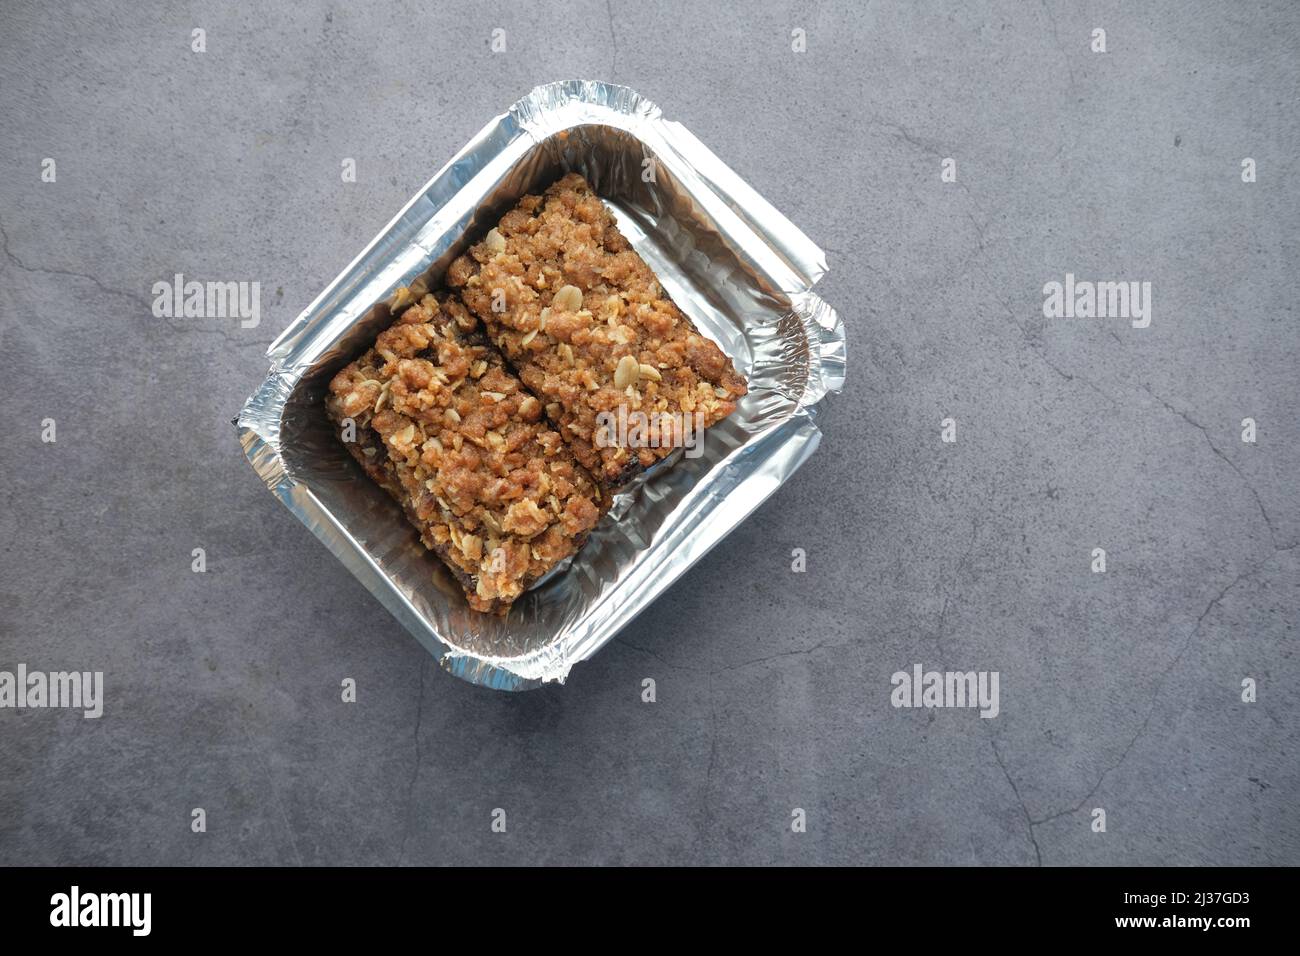 top view of date fruit chocolate bar in a take away container  Stock Photo